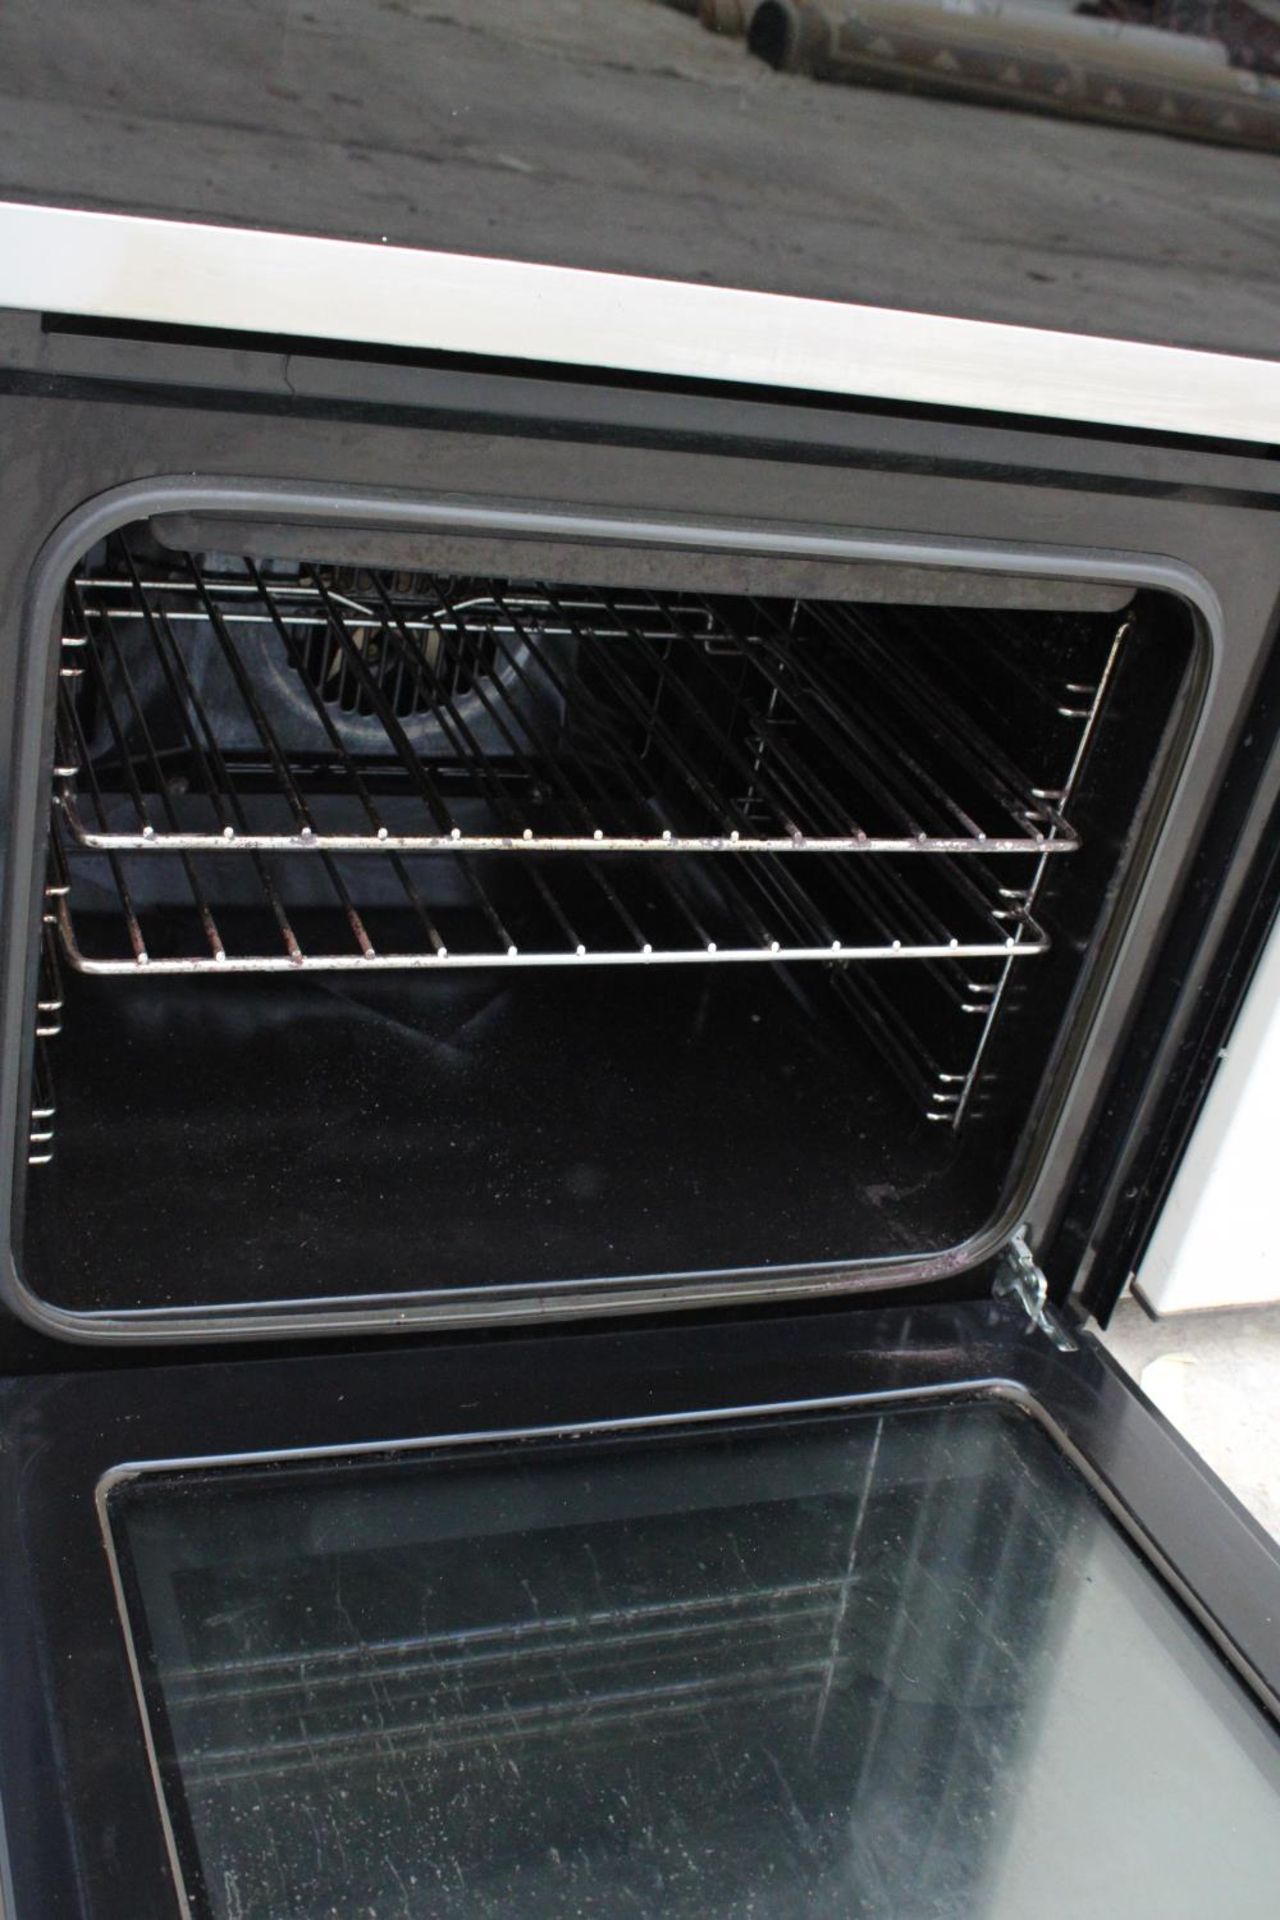 A CHROME AND BLACK BAUMATIC INTERGRATED DOUBLE OVEN - Image 3 of 4